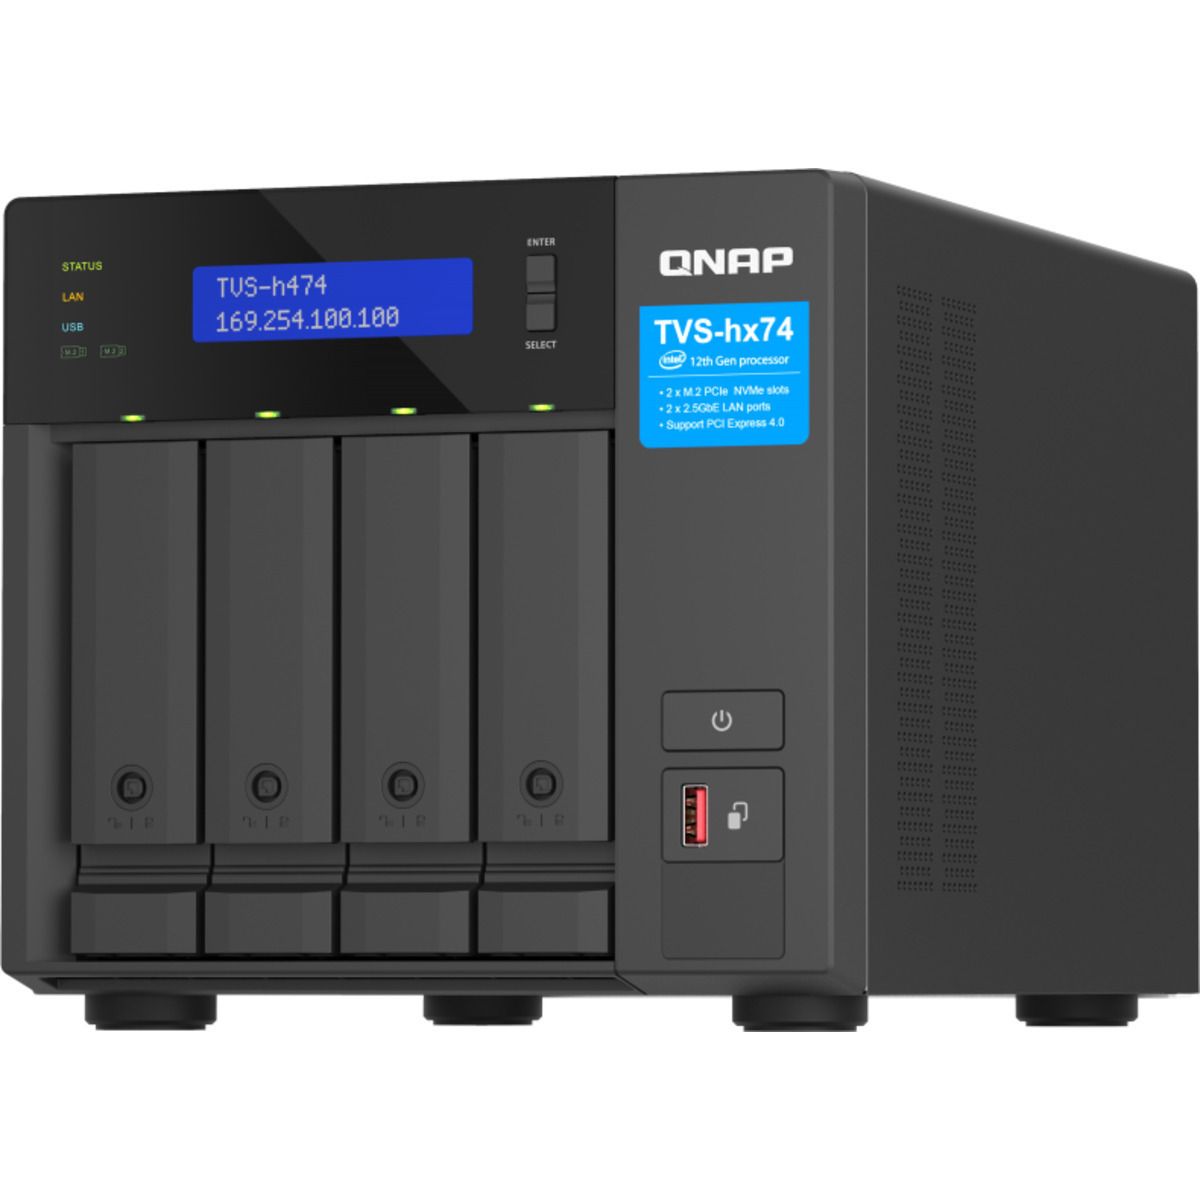 QNAP TVS-h474 Pentium Gold 12tb 4-Bay Desktop Multimedia / Power User / Business NAS - Network Attached Storage Device 3x4tb Seagate IronWolf ST4000VN006 3.5 5400rpm SATA 6Gb/s HDD NAS Class Drives Installed - Burn-In Tested - FREE RAM UPGRADE TVS-h474 Pentium Gold